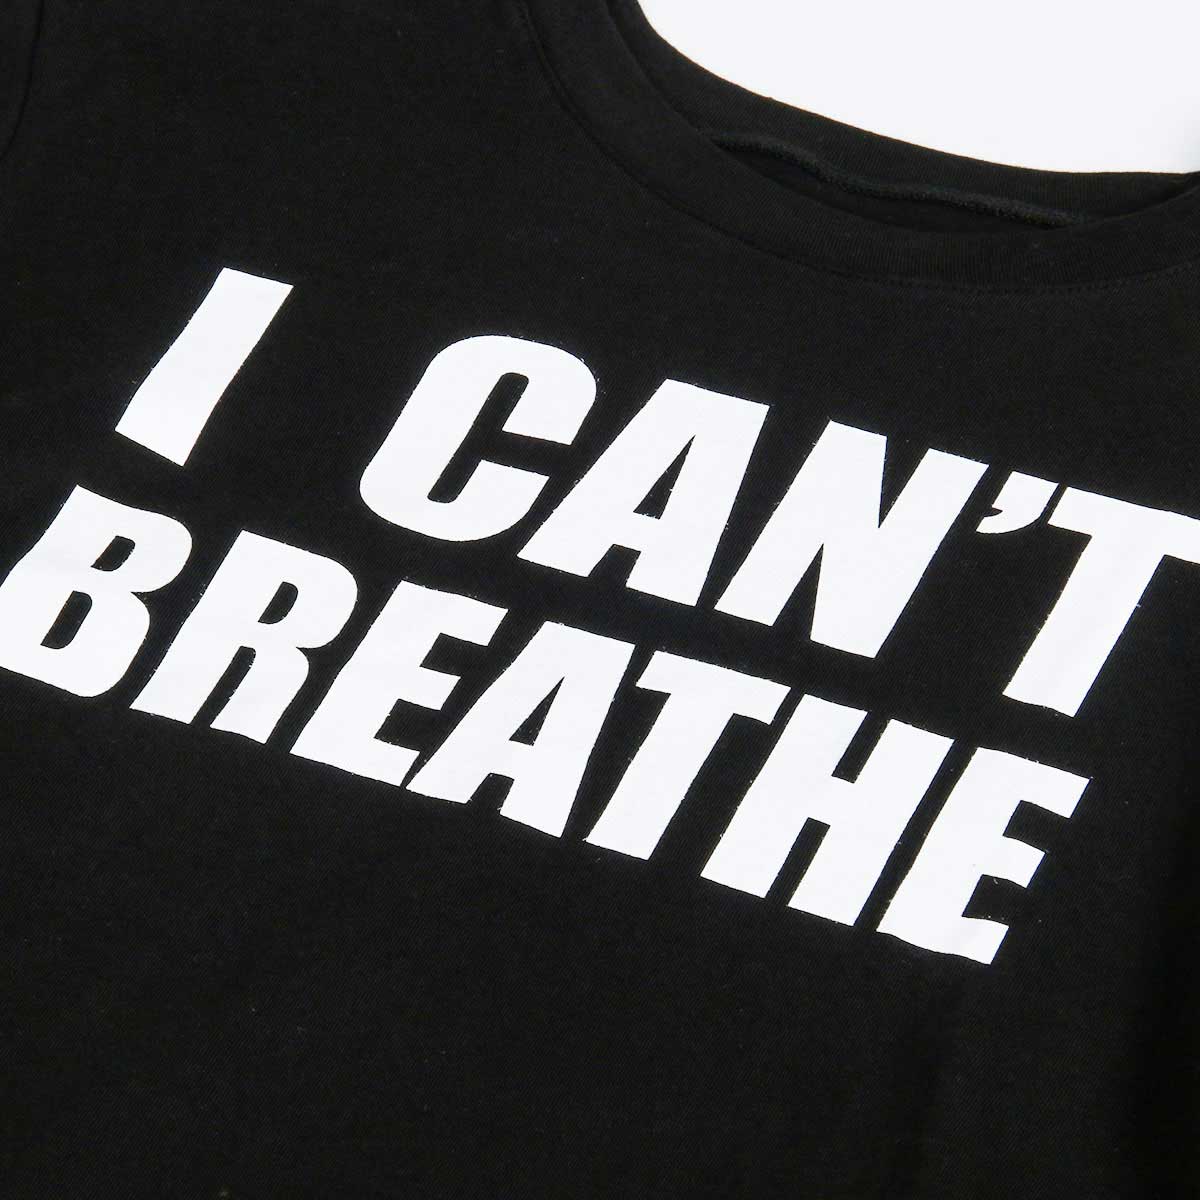 I Can't Breathe Sleeveless Shirt Protest Tank Top